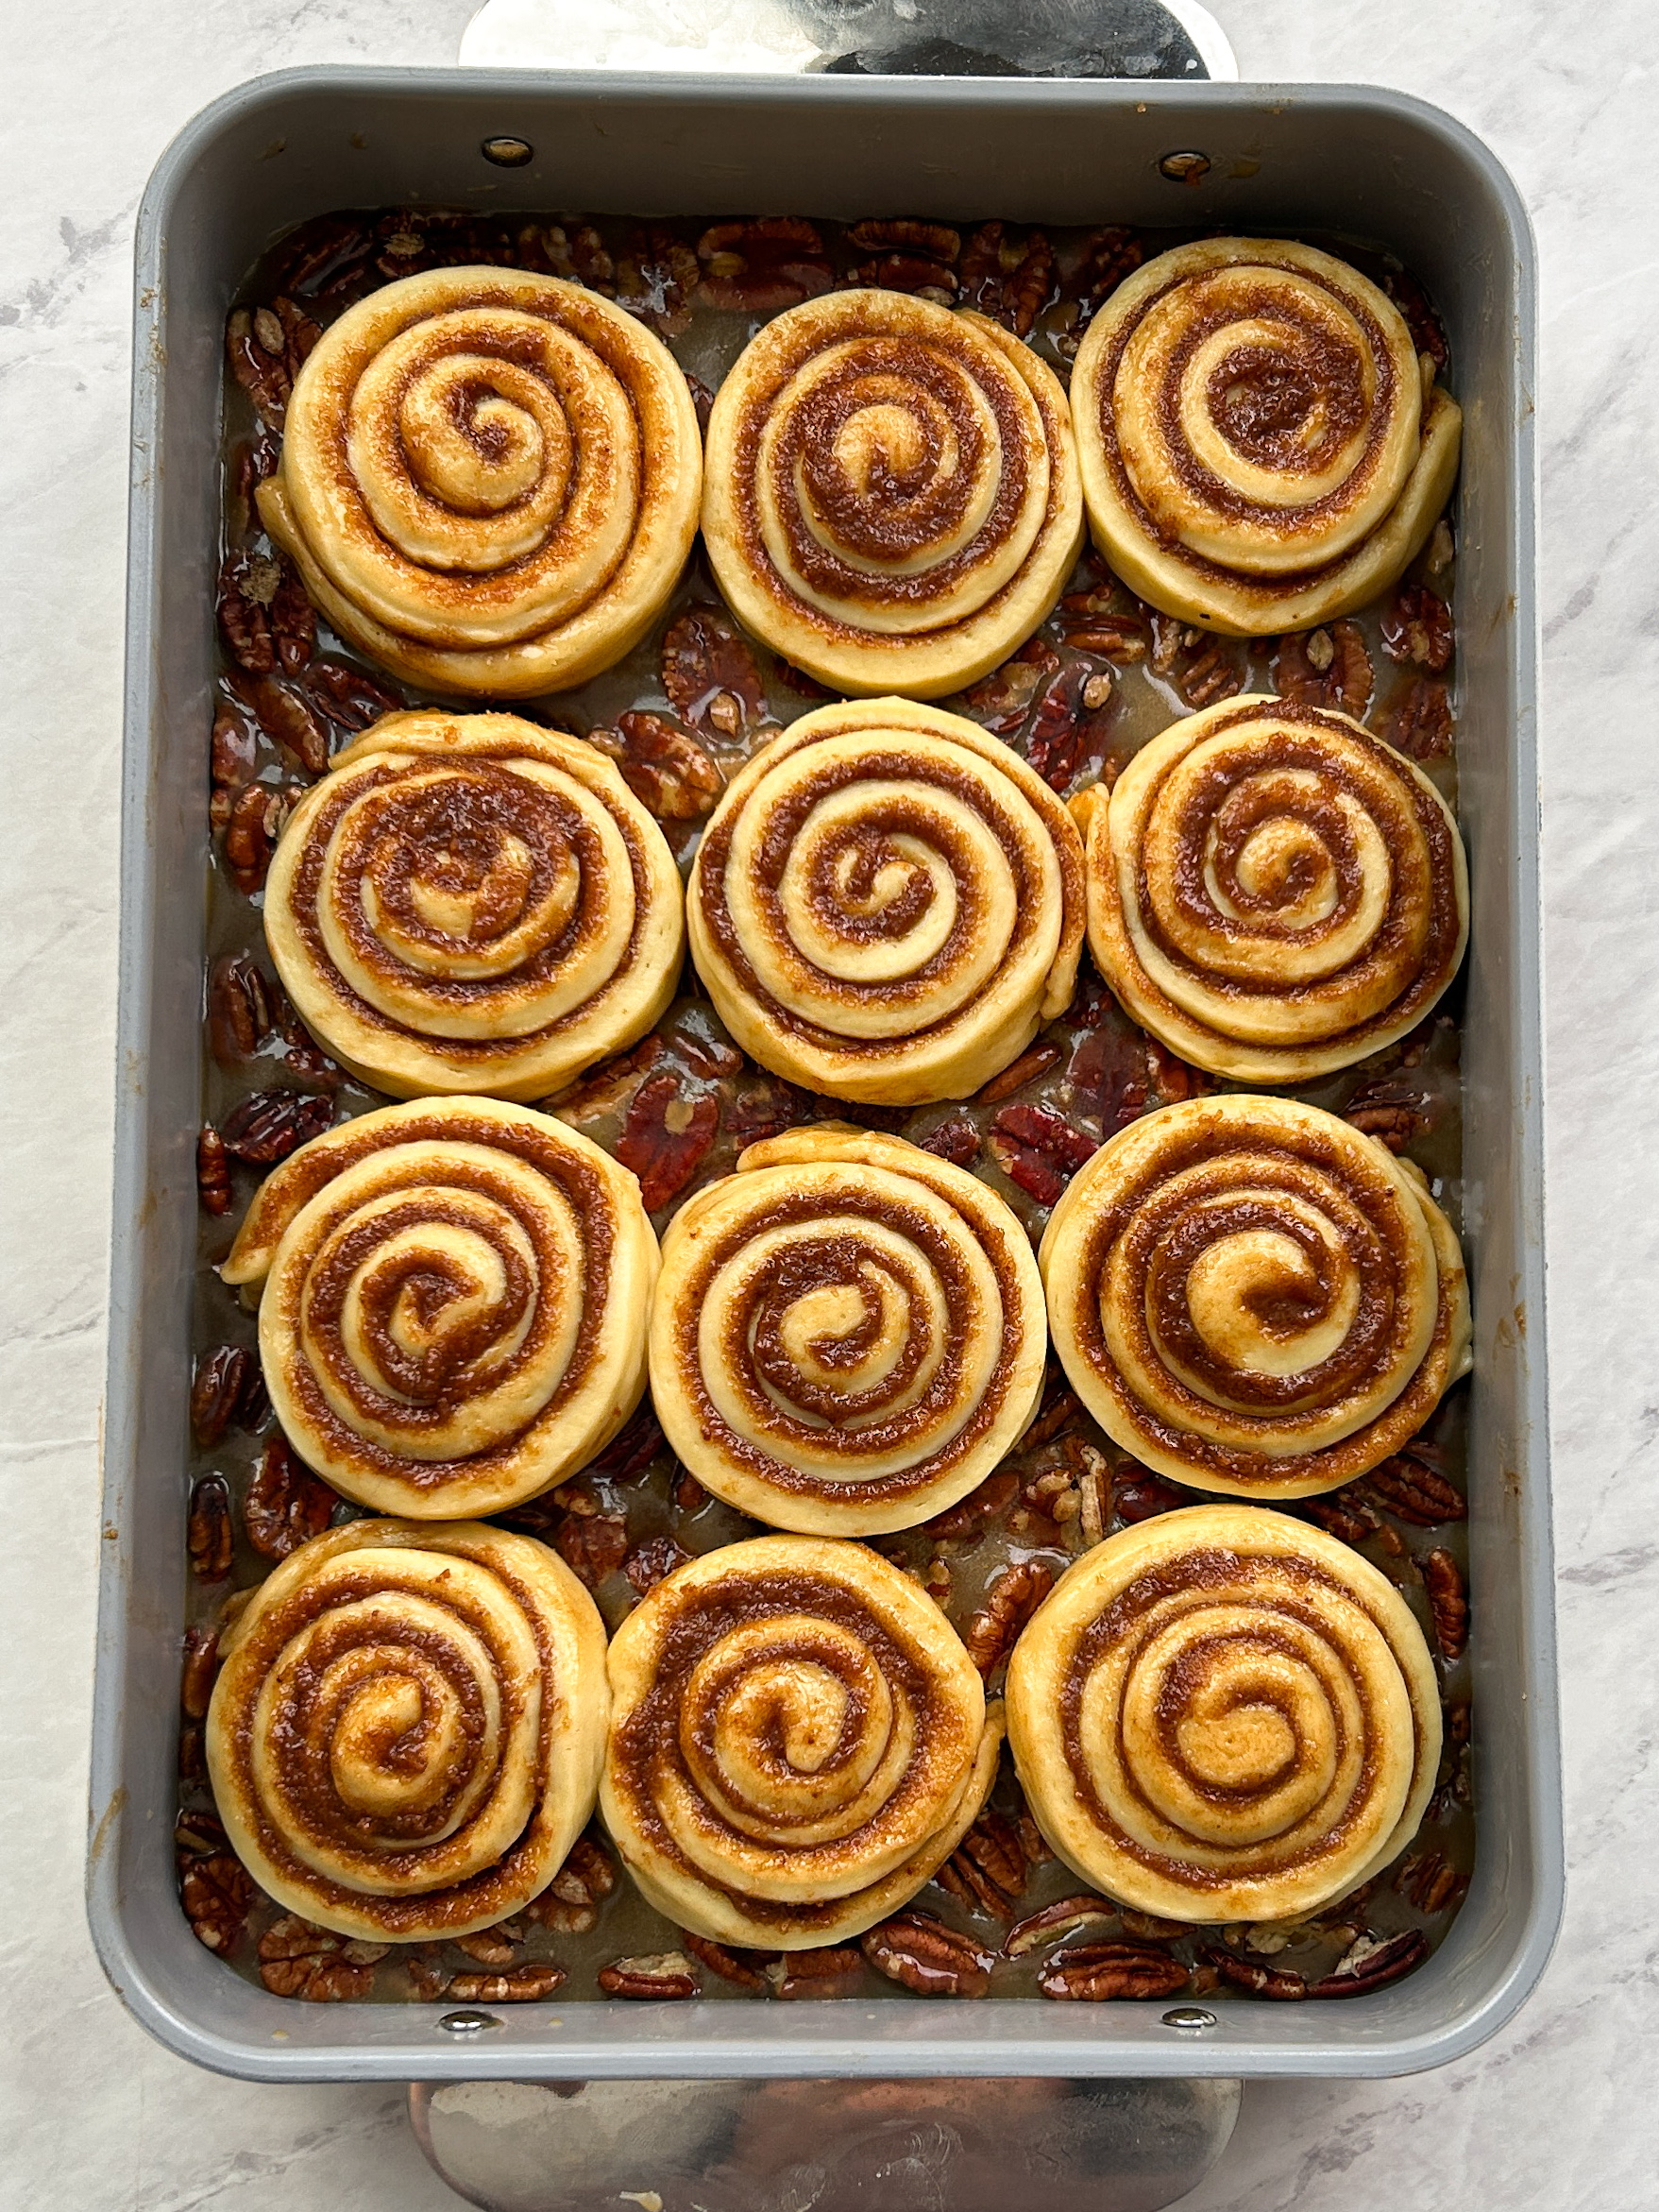 12 cinnamon rolls shaped and placed on top of sticky pecan filling in a 9x13 baking dish, waiting to be proofed